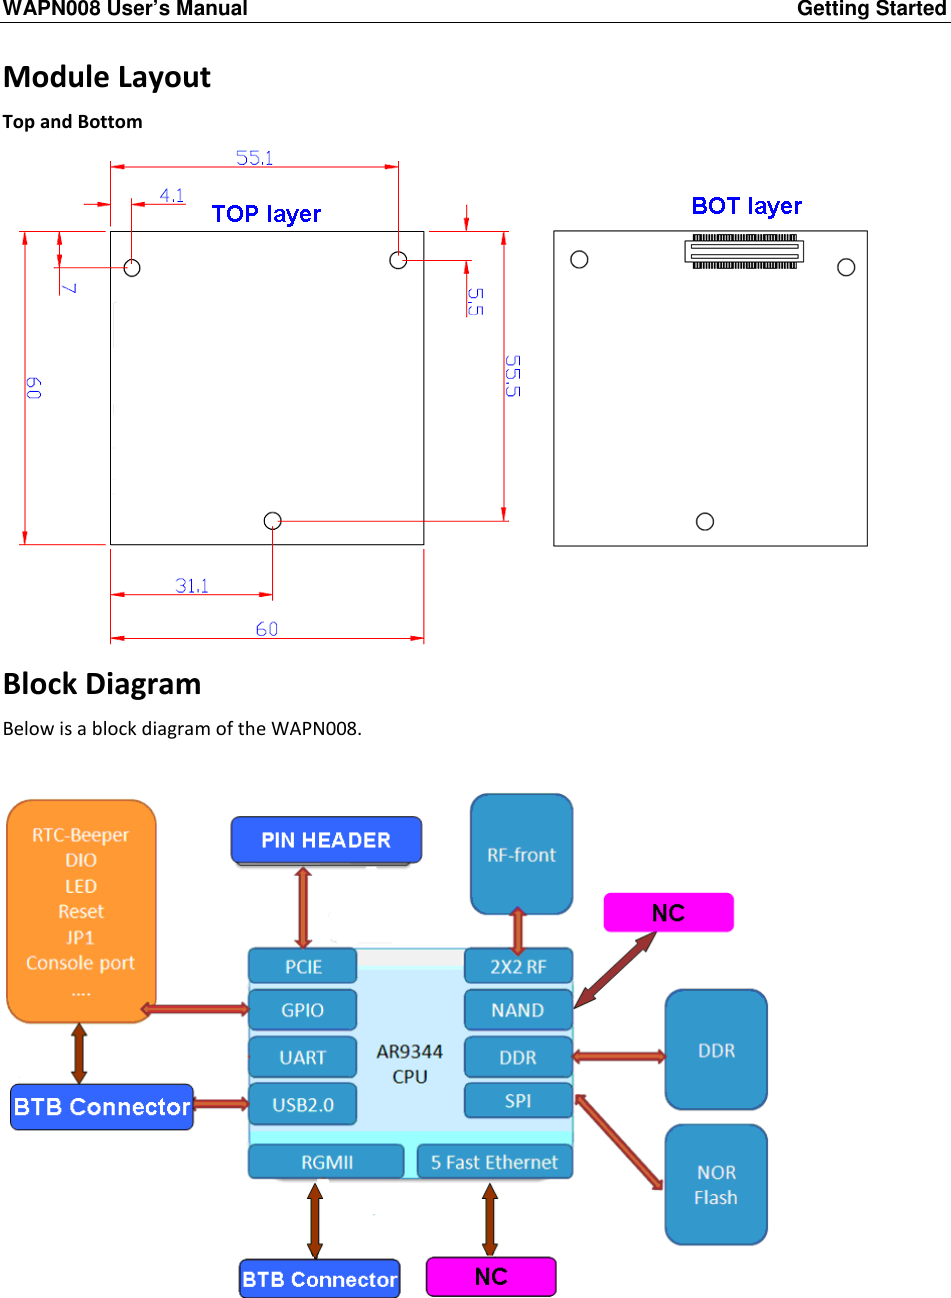 WAPN008 User’s Manual  Getting Started        Module Layout Top and Bottom  Block Diagram Below is a block diagram of the WAPN008.       